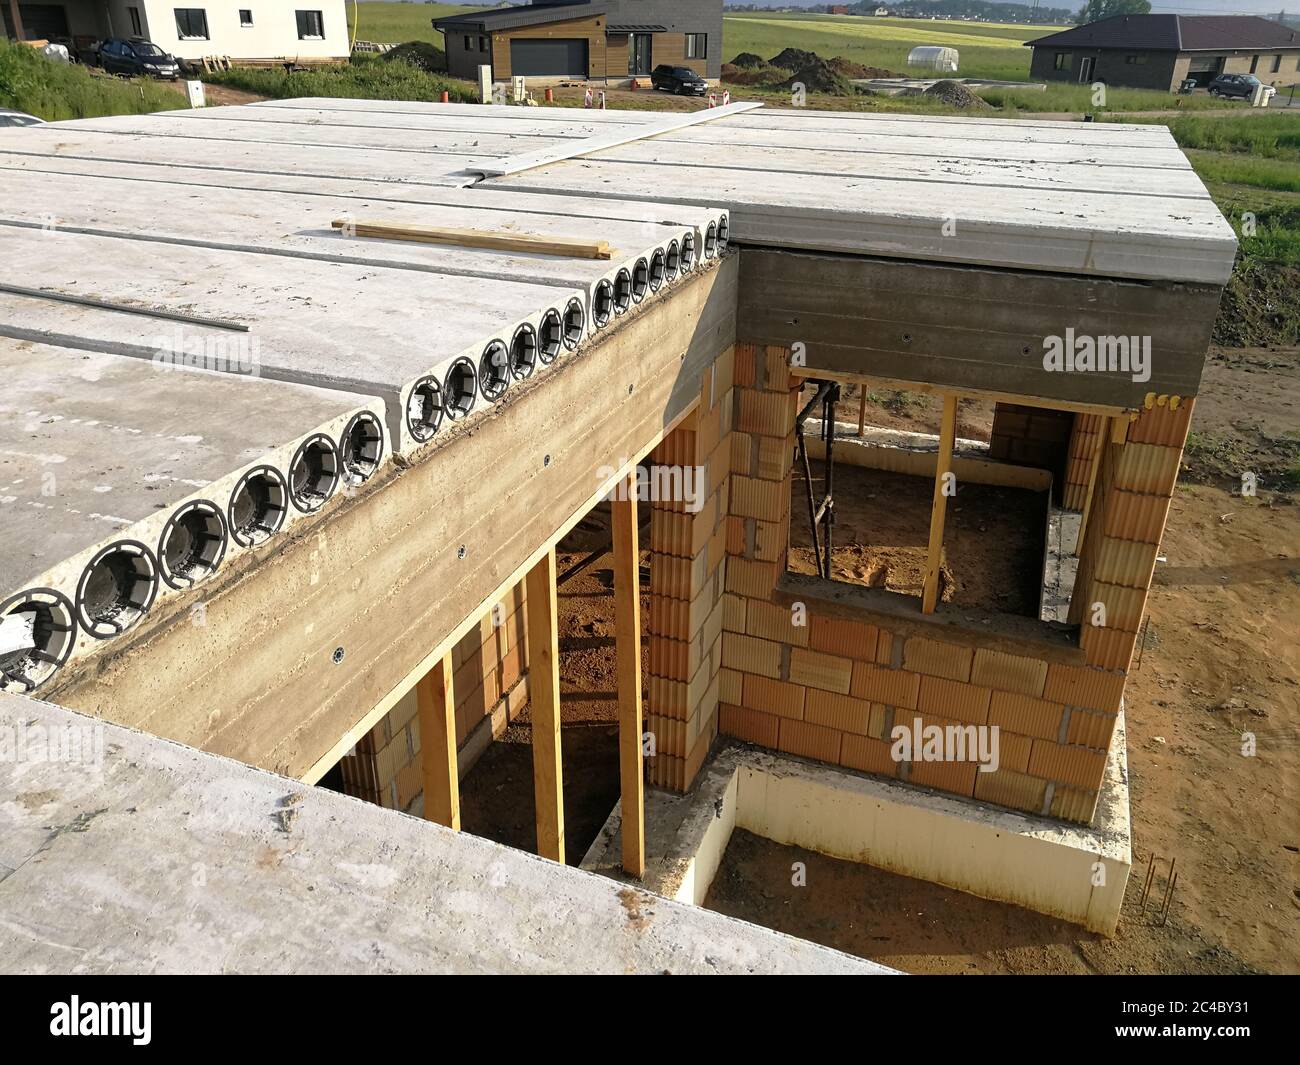 https://c8.alamy.com/comp/2C4BY31/concrete-hollow-core-slabs-close-up-at-constructions-site-construction-industry-concept-2C4BY31.jpg